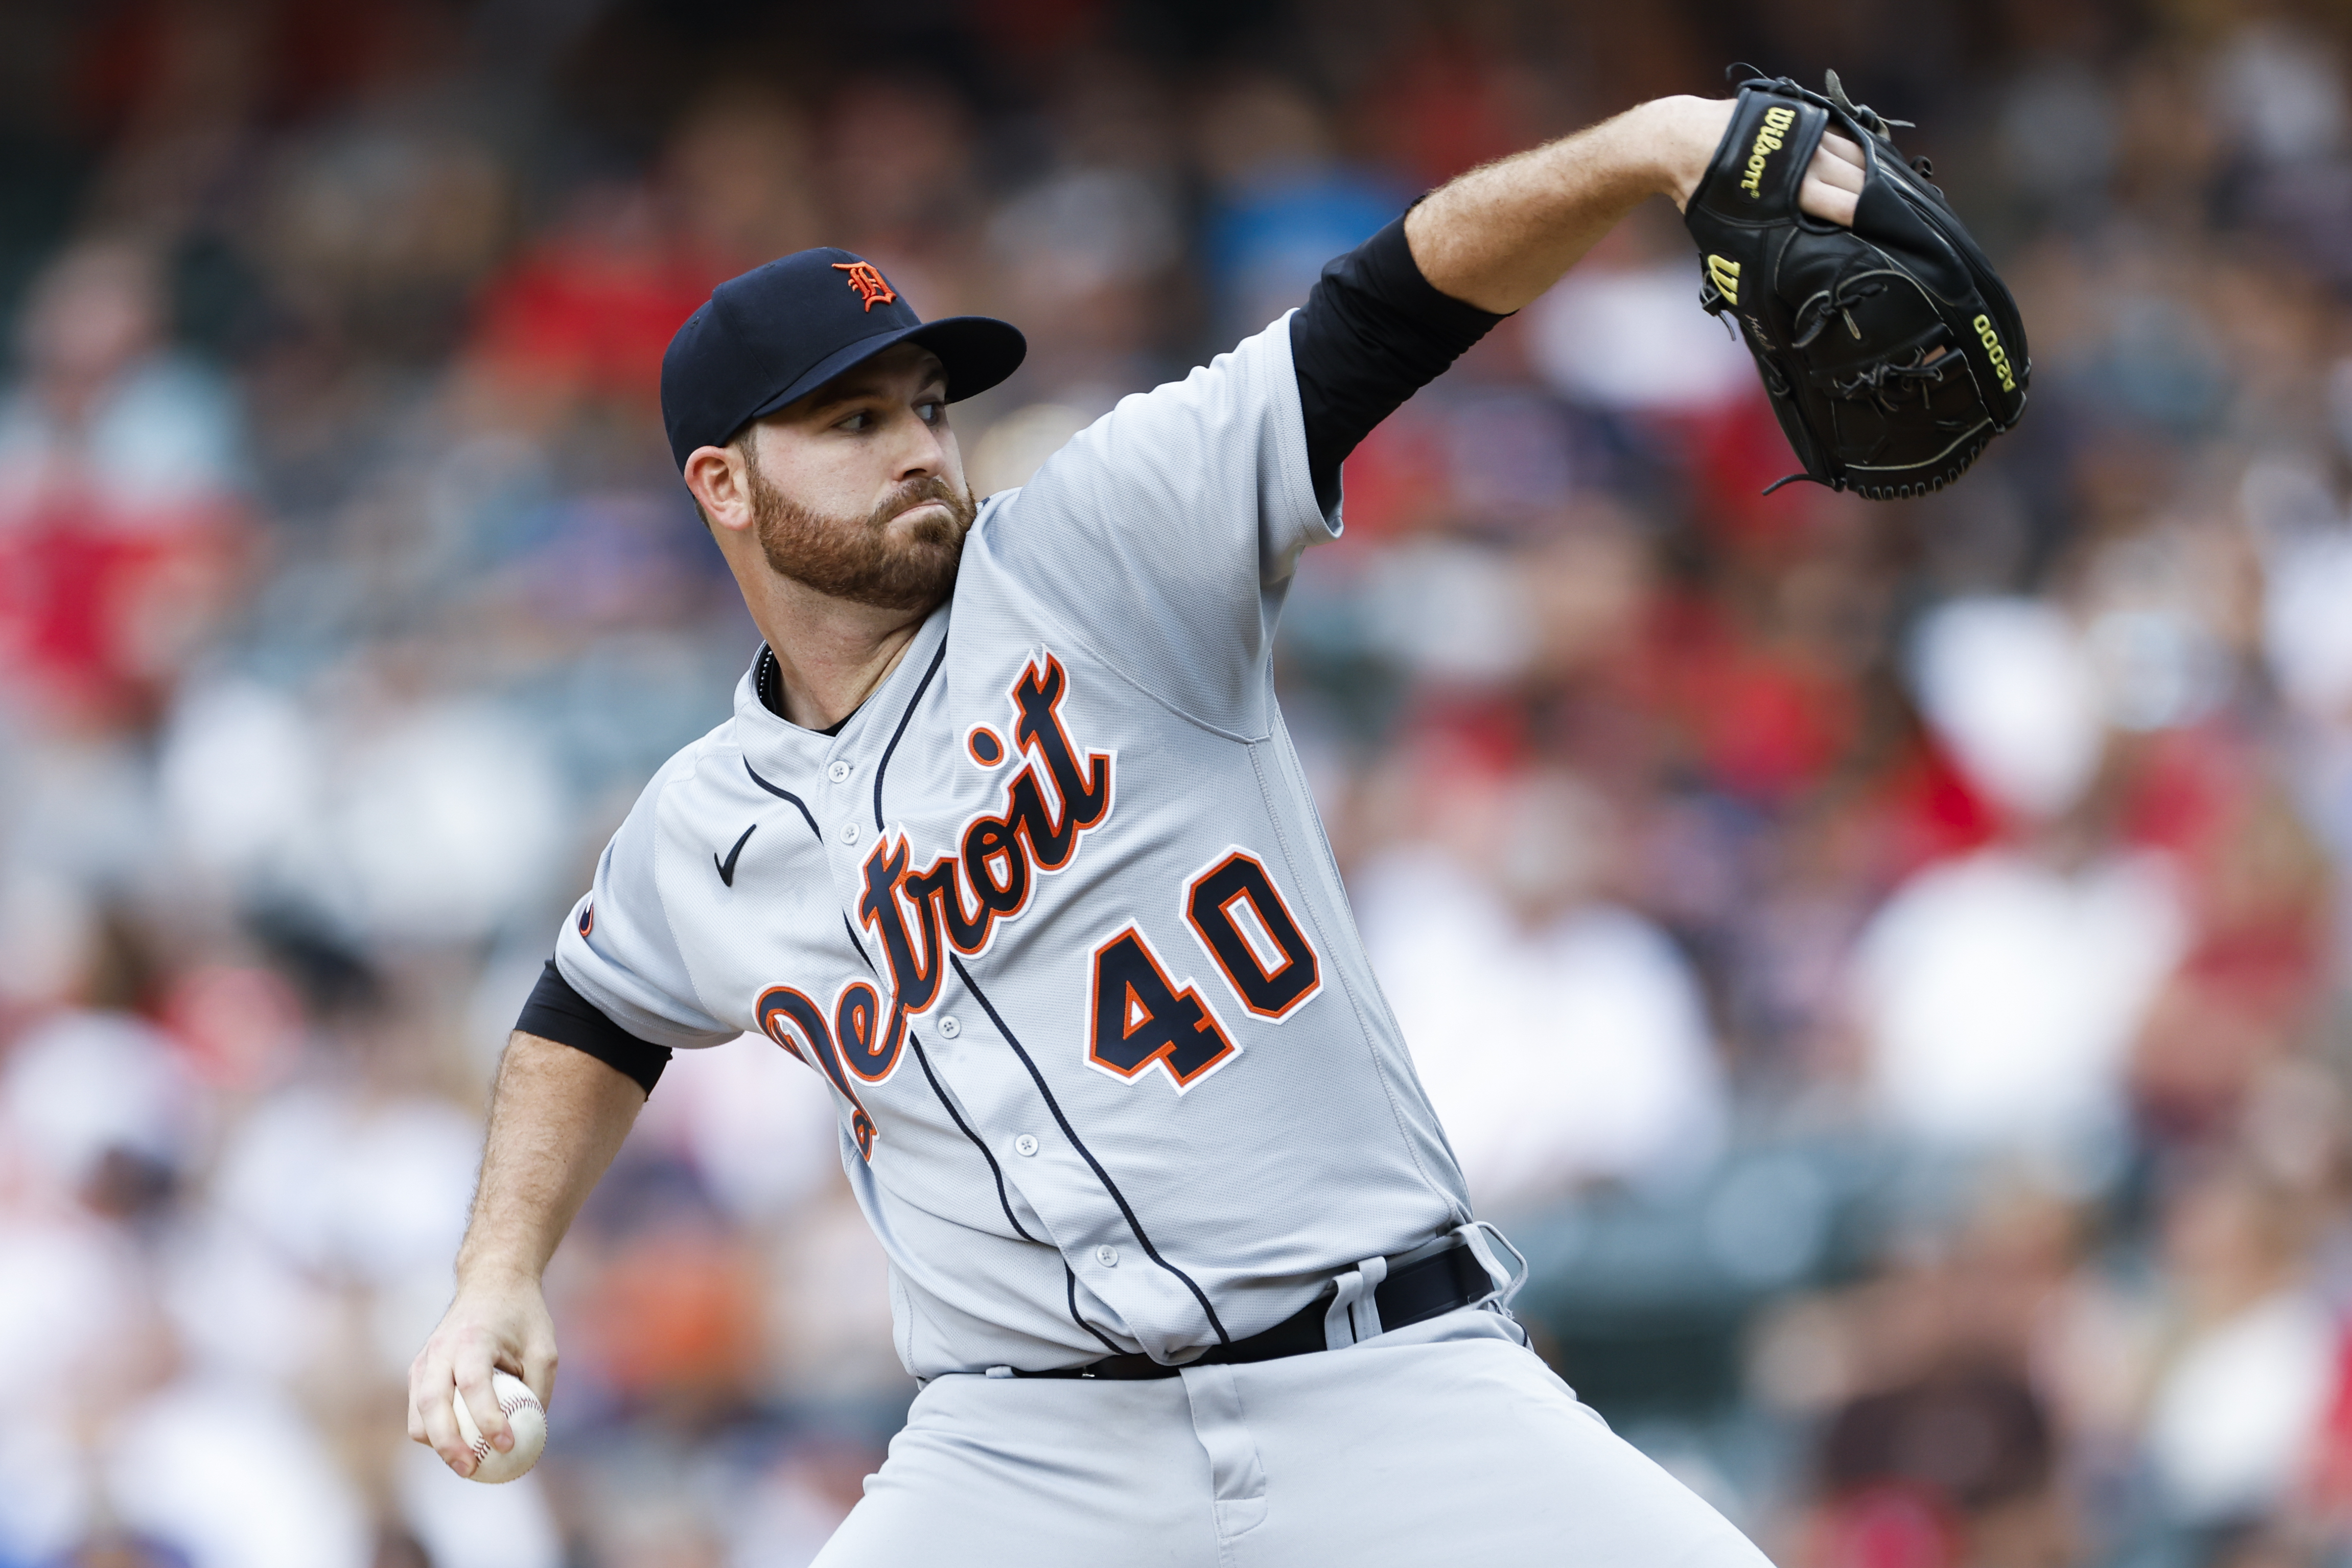 Spring training report: Beau Brieske shines, Tigers rotation looks sharp  early - Bless You Boys